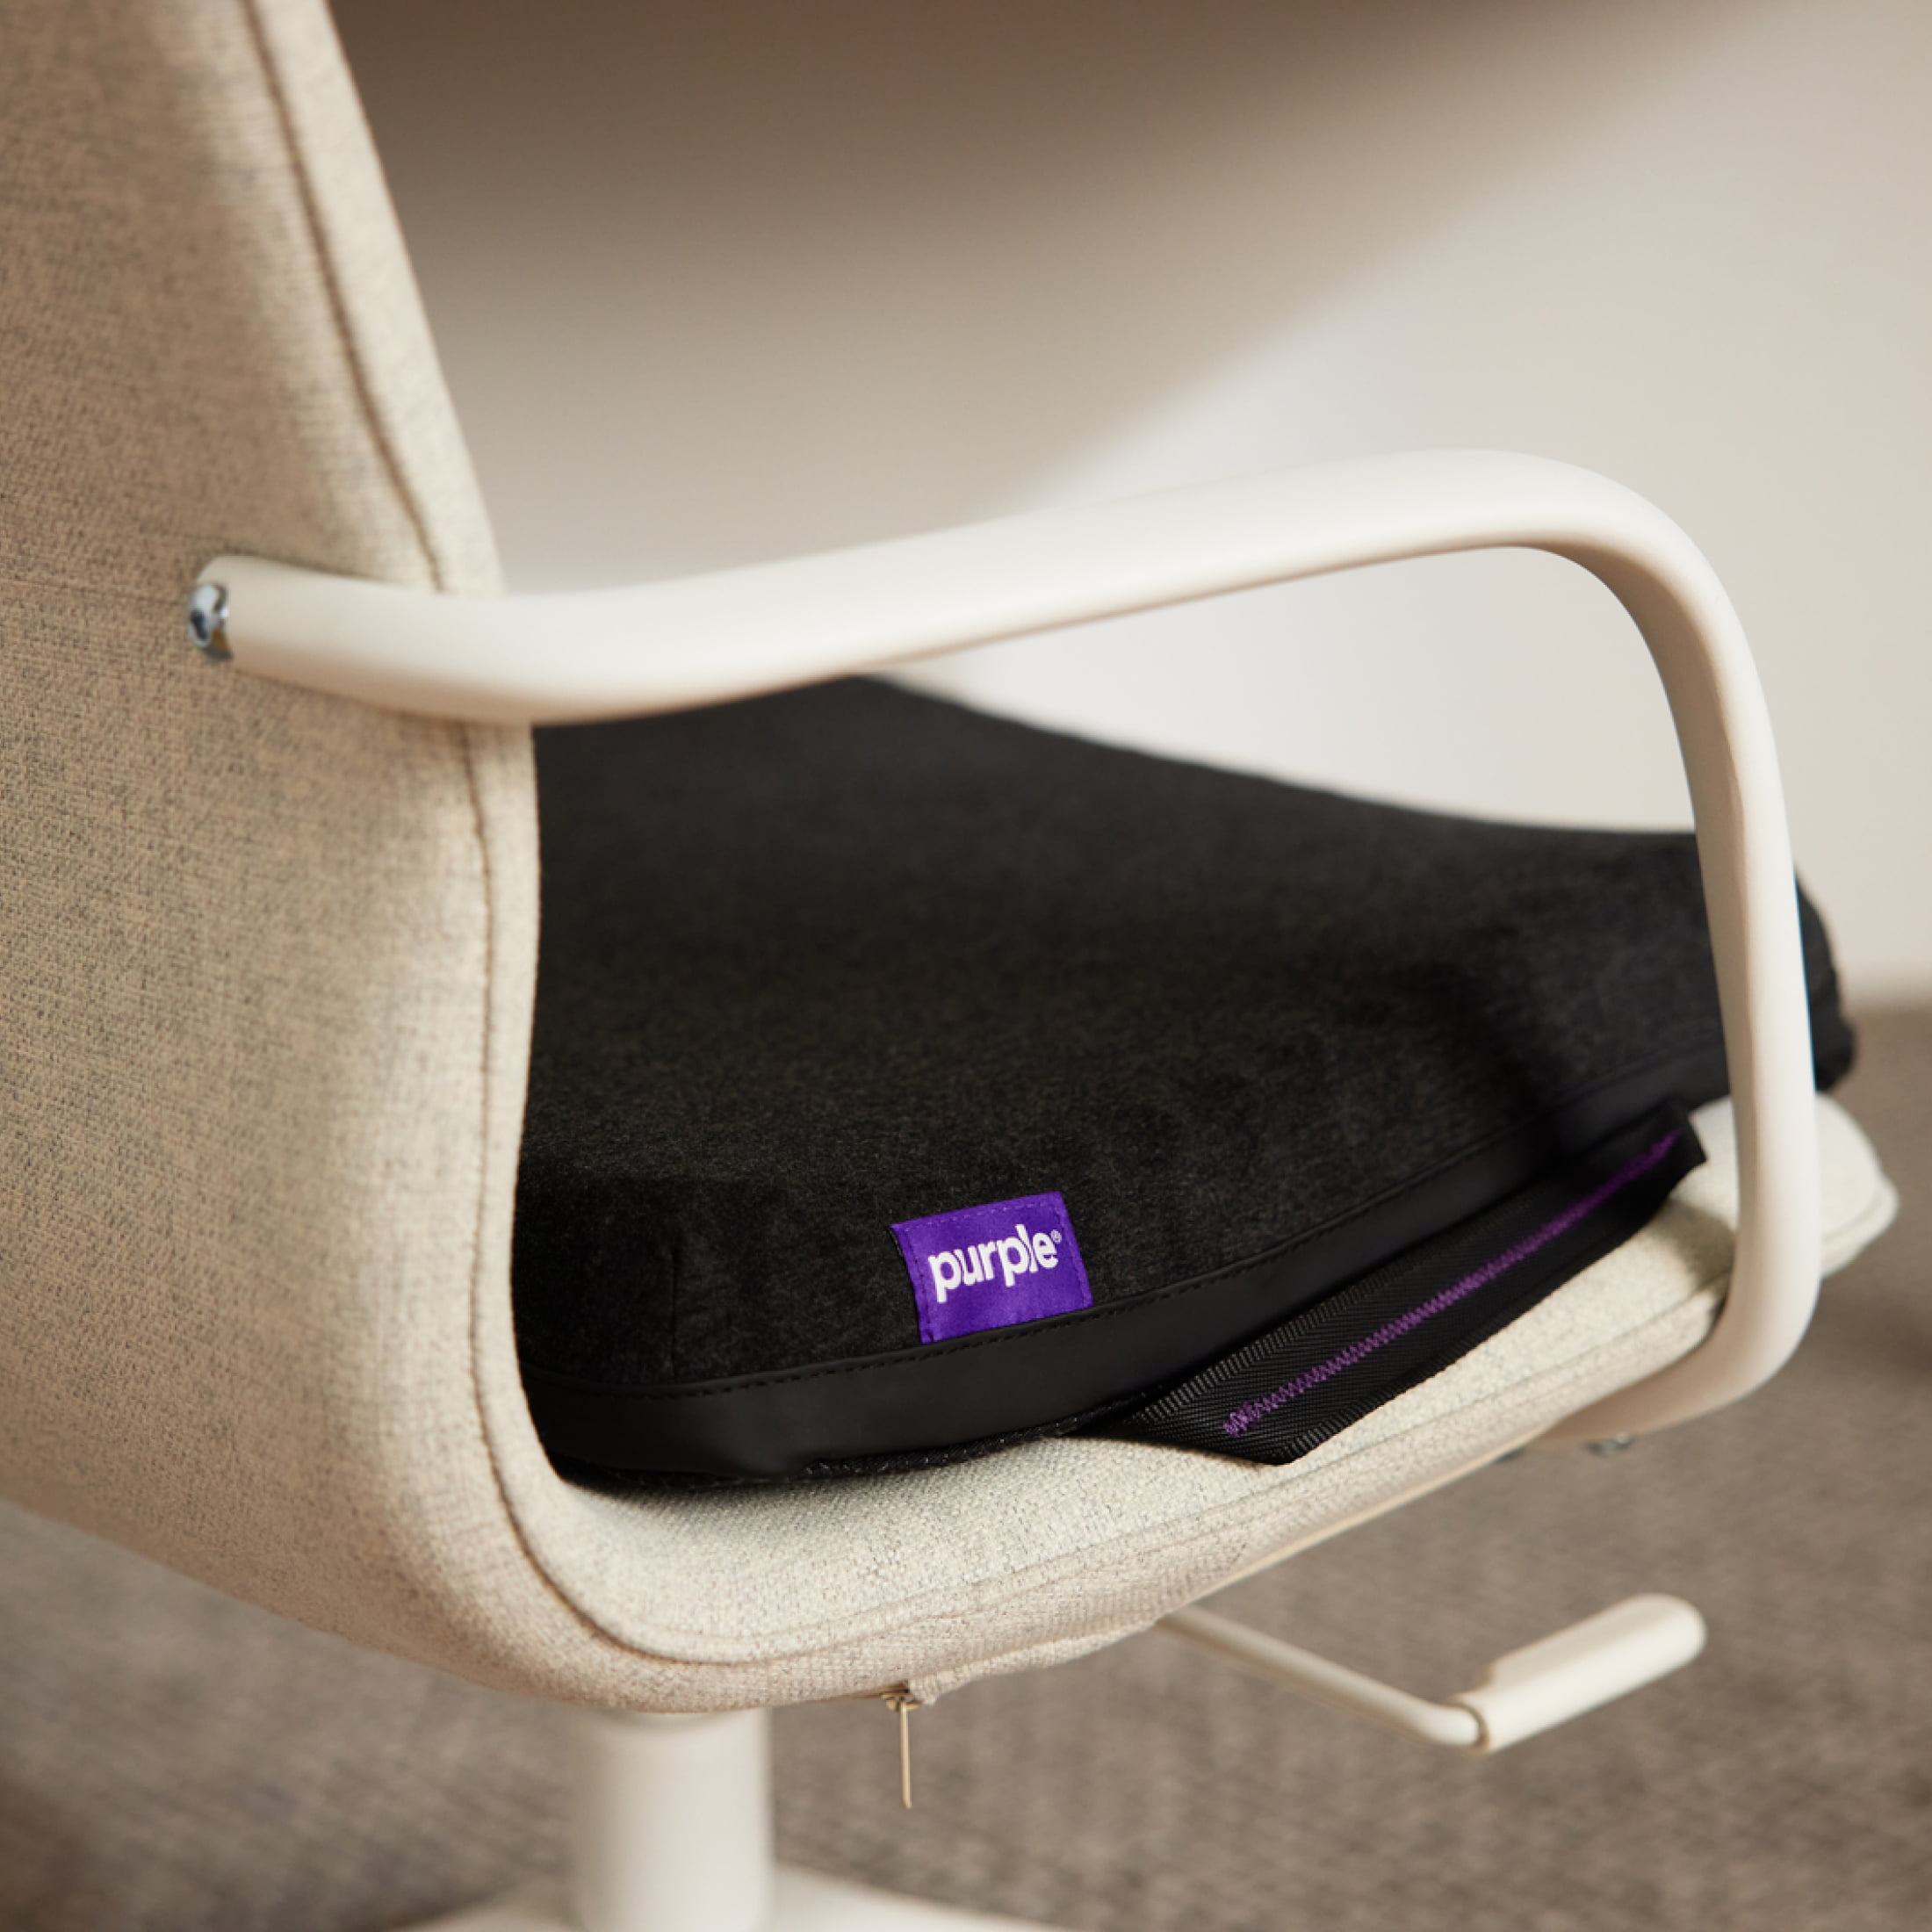 Purple Back Cushion 15.75“ x 9.25“, Pressure Reducing GelFlex Grid, Ideal  for Extended Sitting 